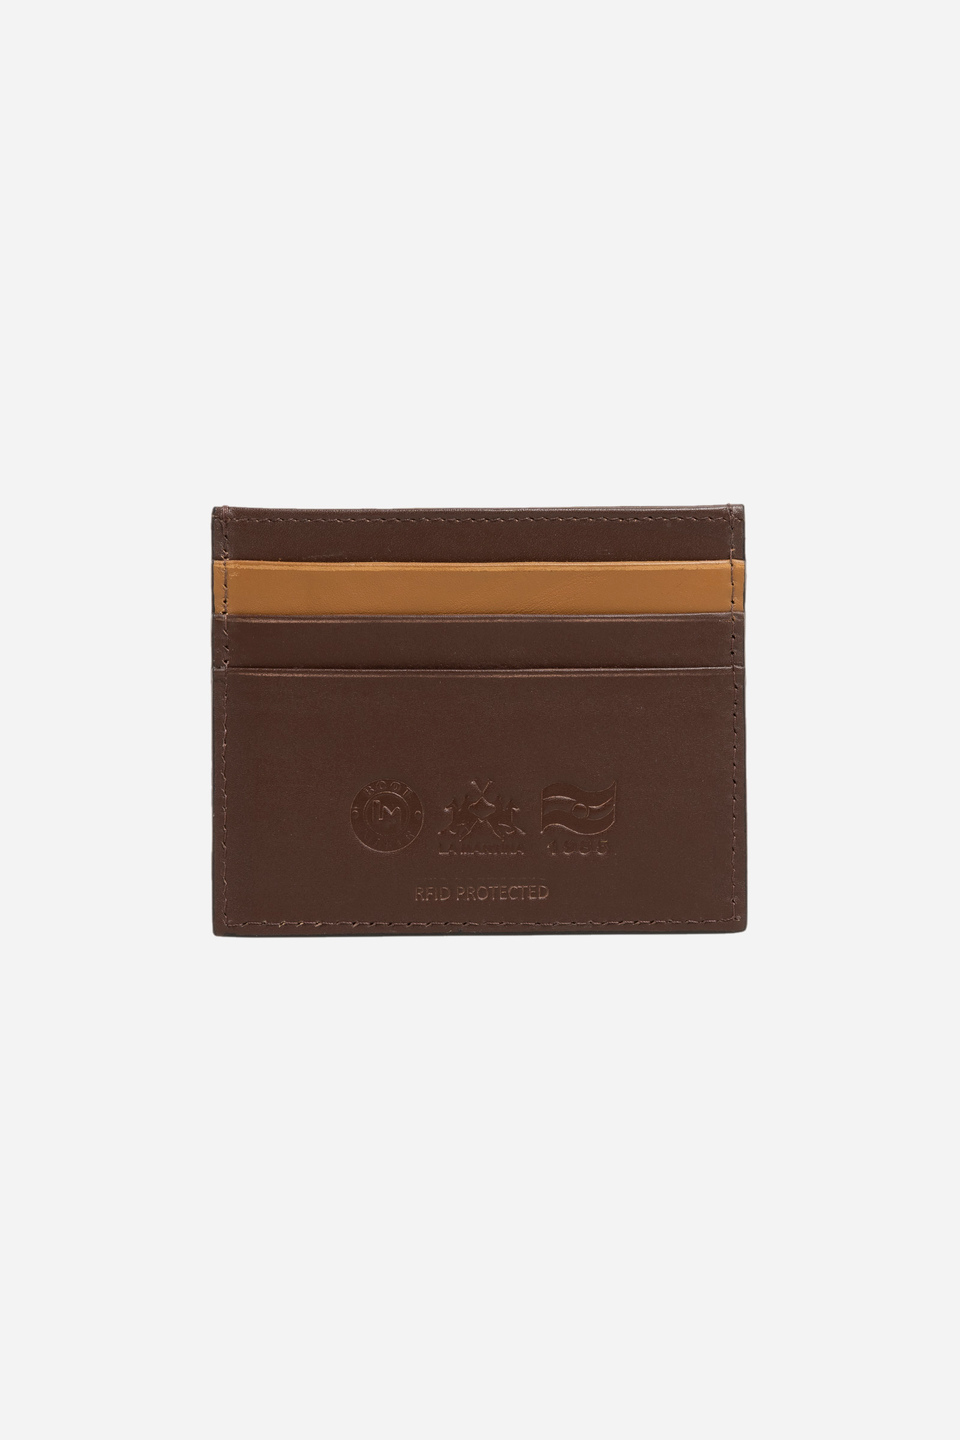 NUVOLA PELLE Elegant Mens Leather Wallet With Coin Coin Purse - Dark Brown  | Wallets Online